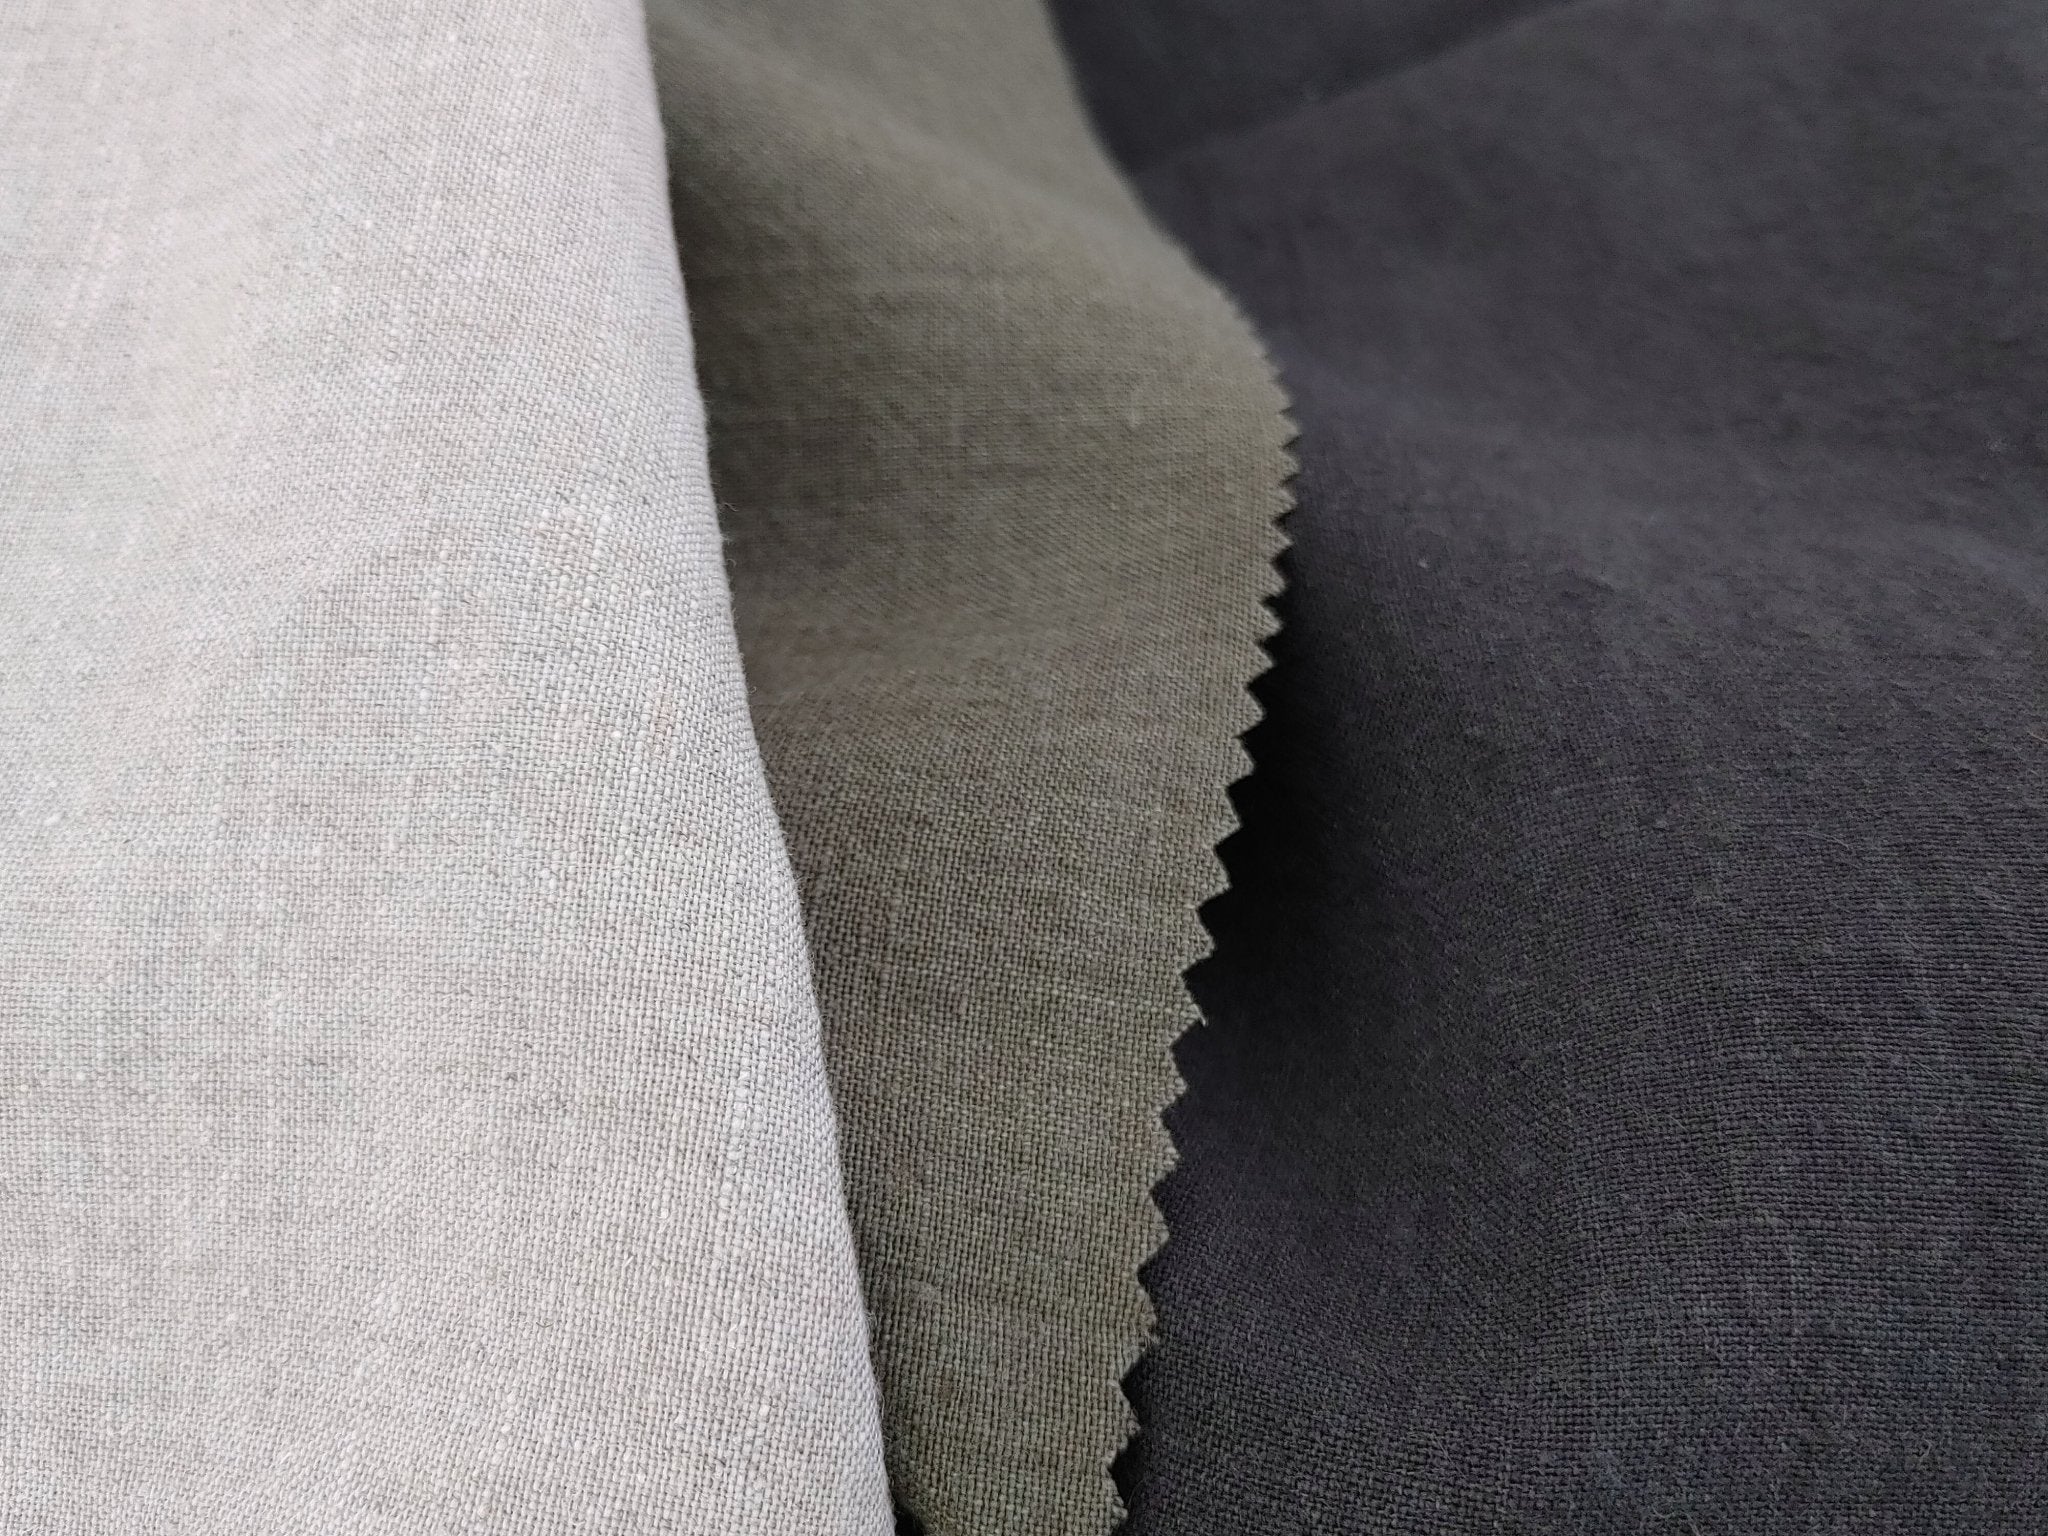 Vintage Dyed Medium Weight Linen Ramie Cotton Fabric with Plain Weave 7820 7771 7770 - The Linen Lab - Green